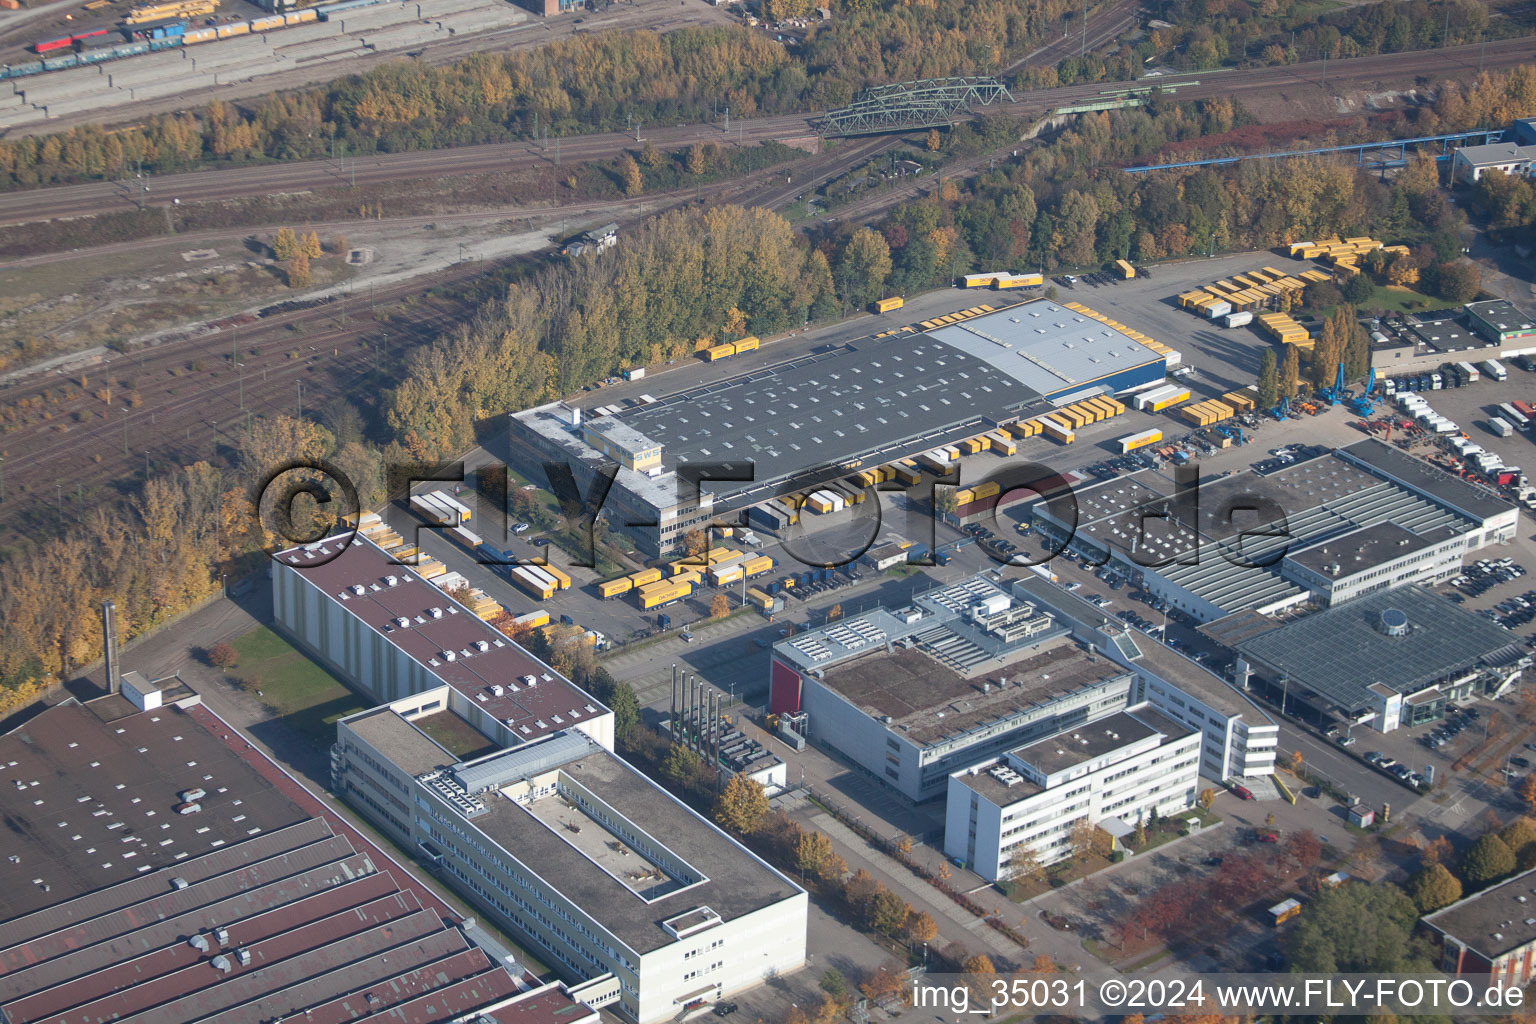 Warehouses and forwarding building SWS-Speditions-GmbH, Otto-street in the district Durlach in Karlsruhe in the state Baden-Wurttemberg from above